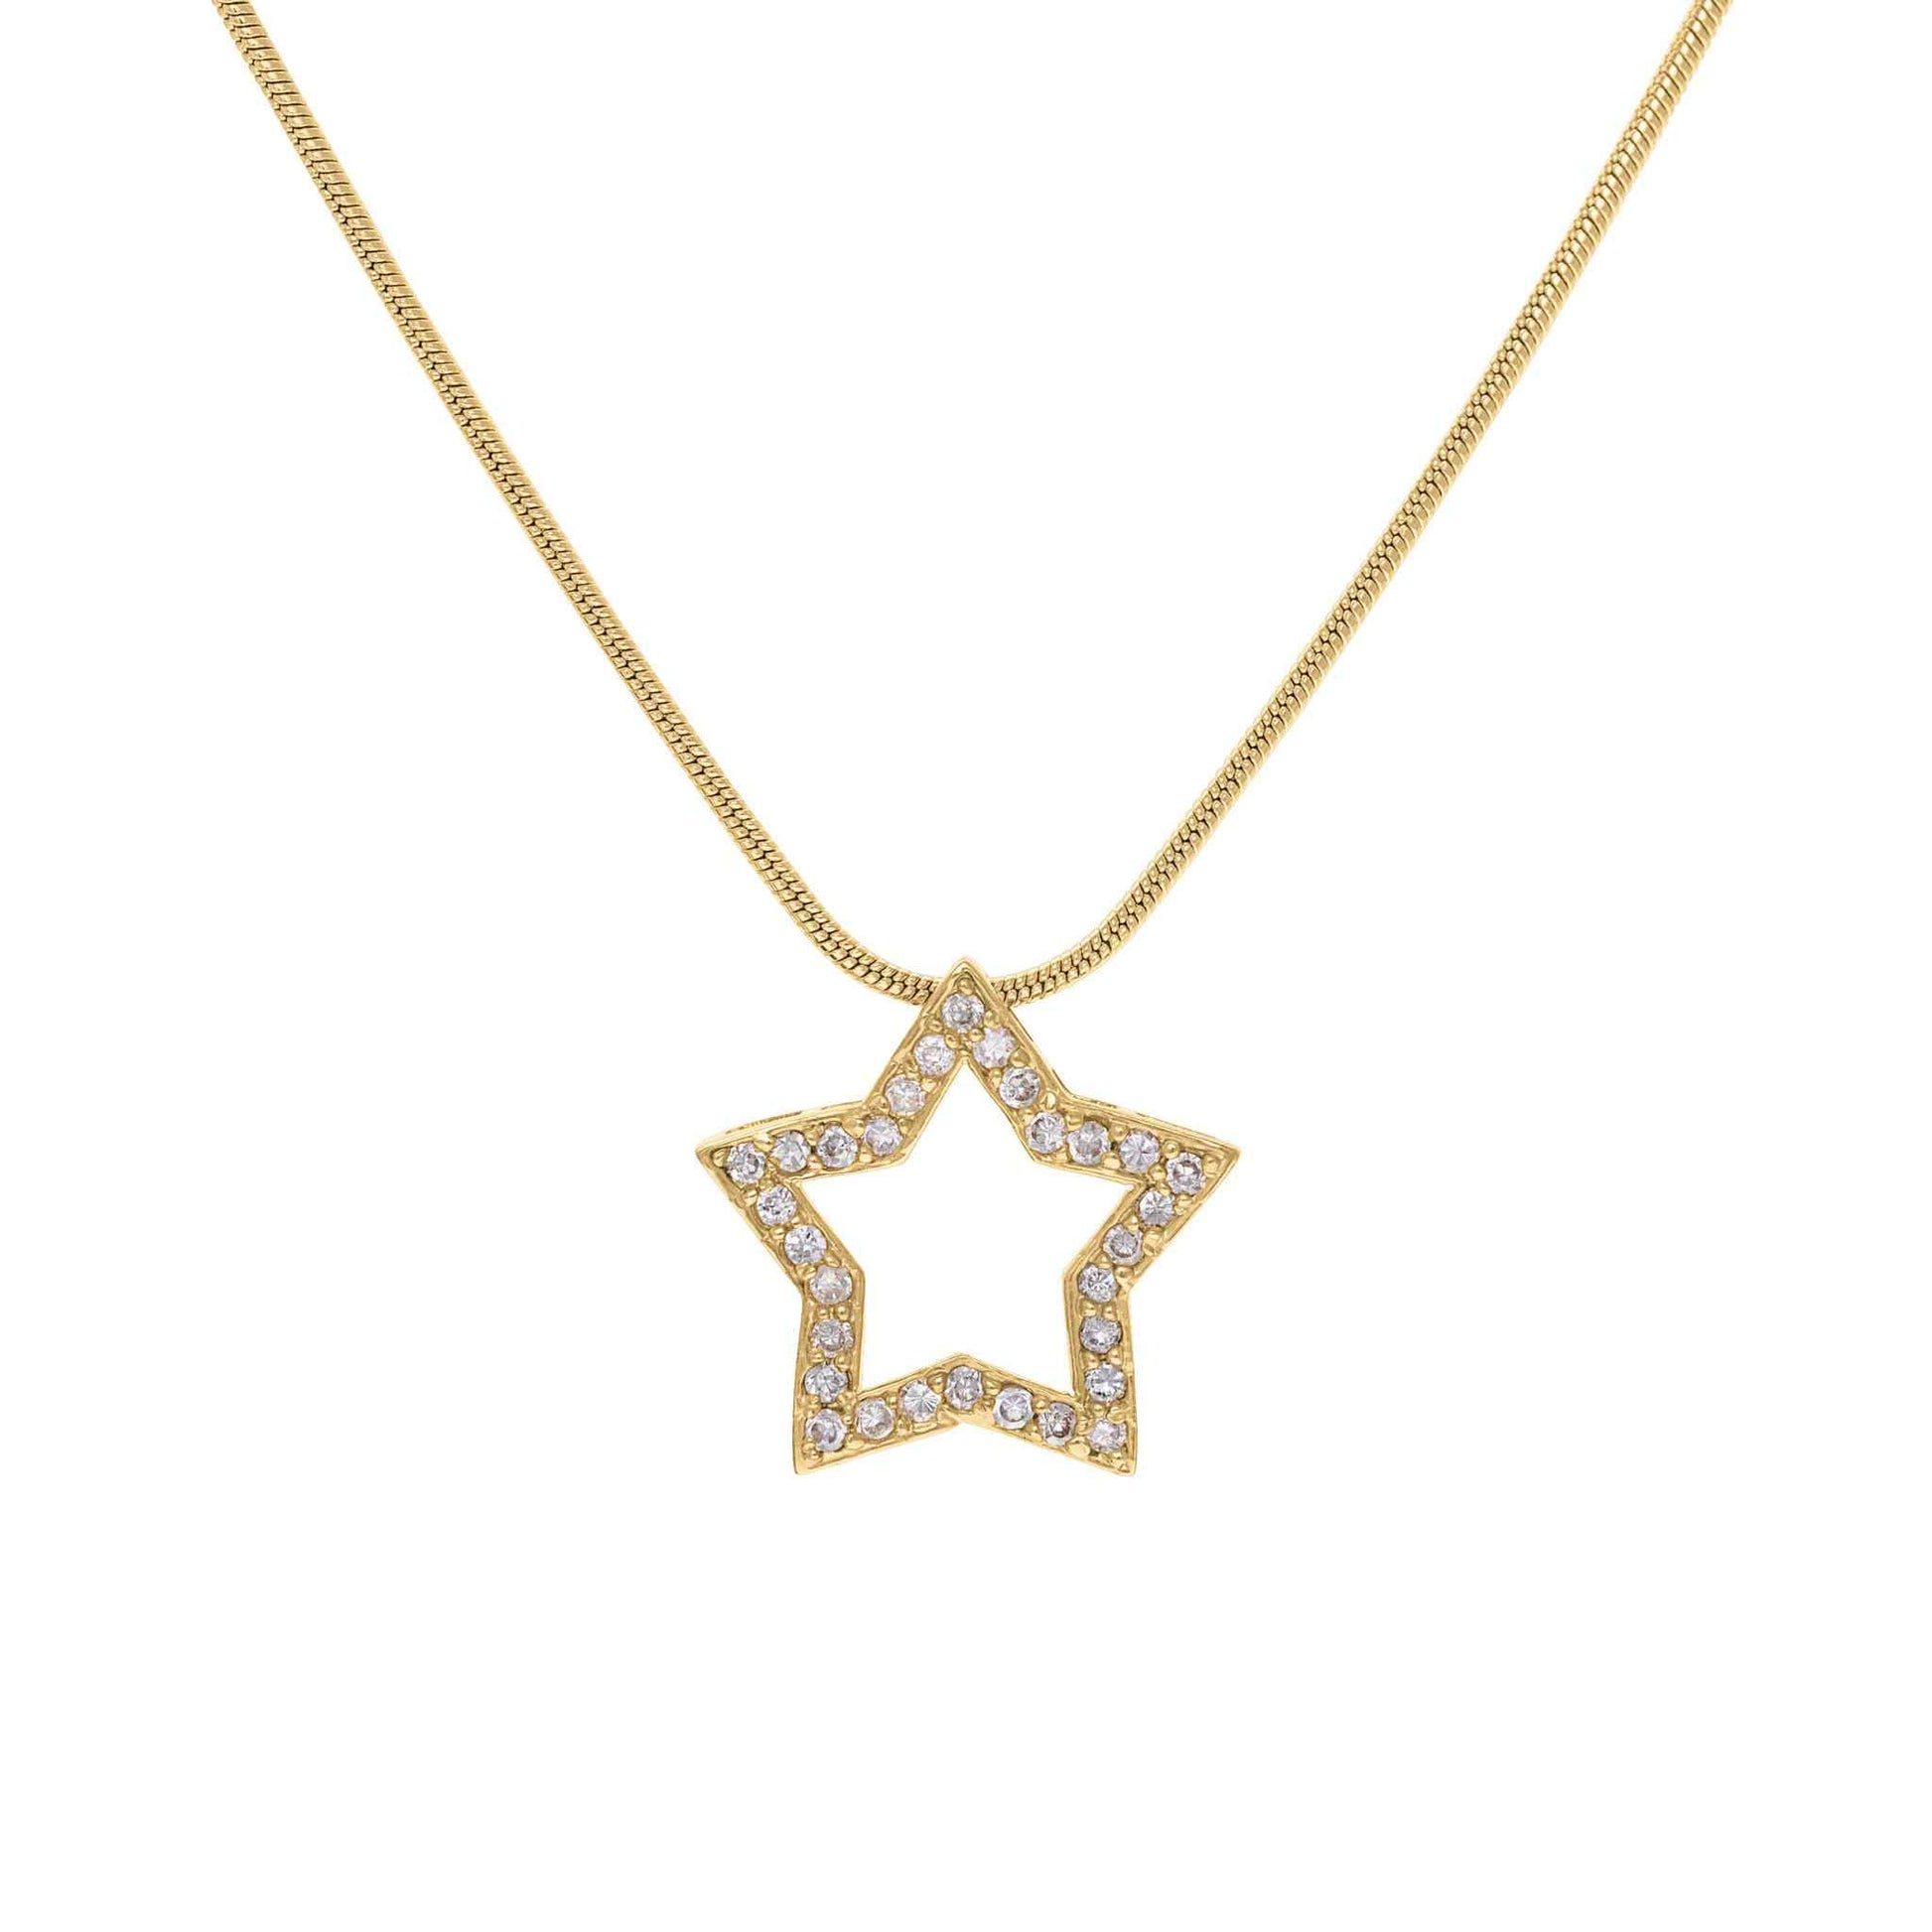 A simulated diamond star necklace displayed on a neutral white background.